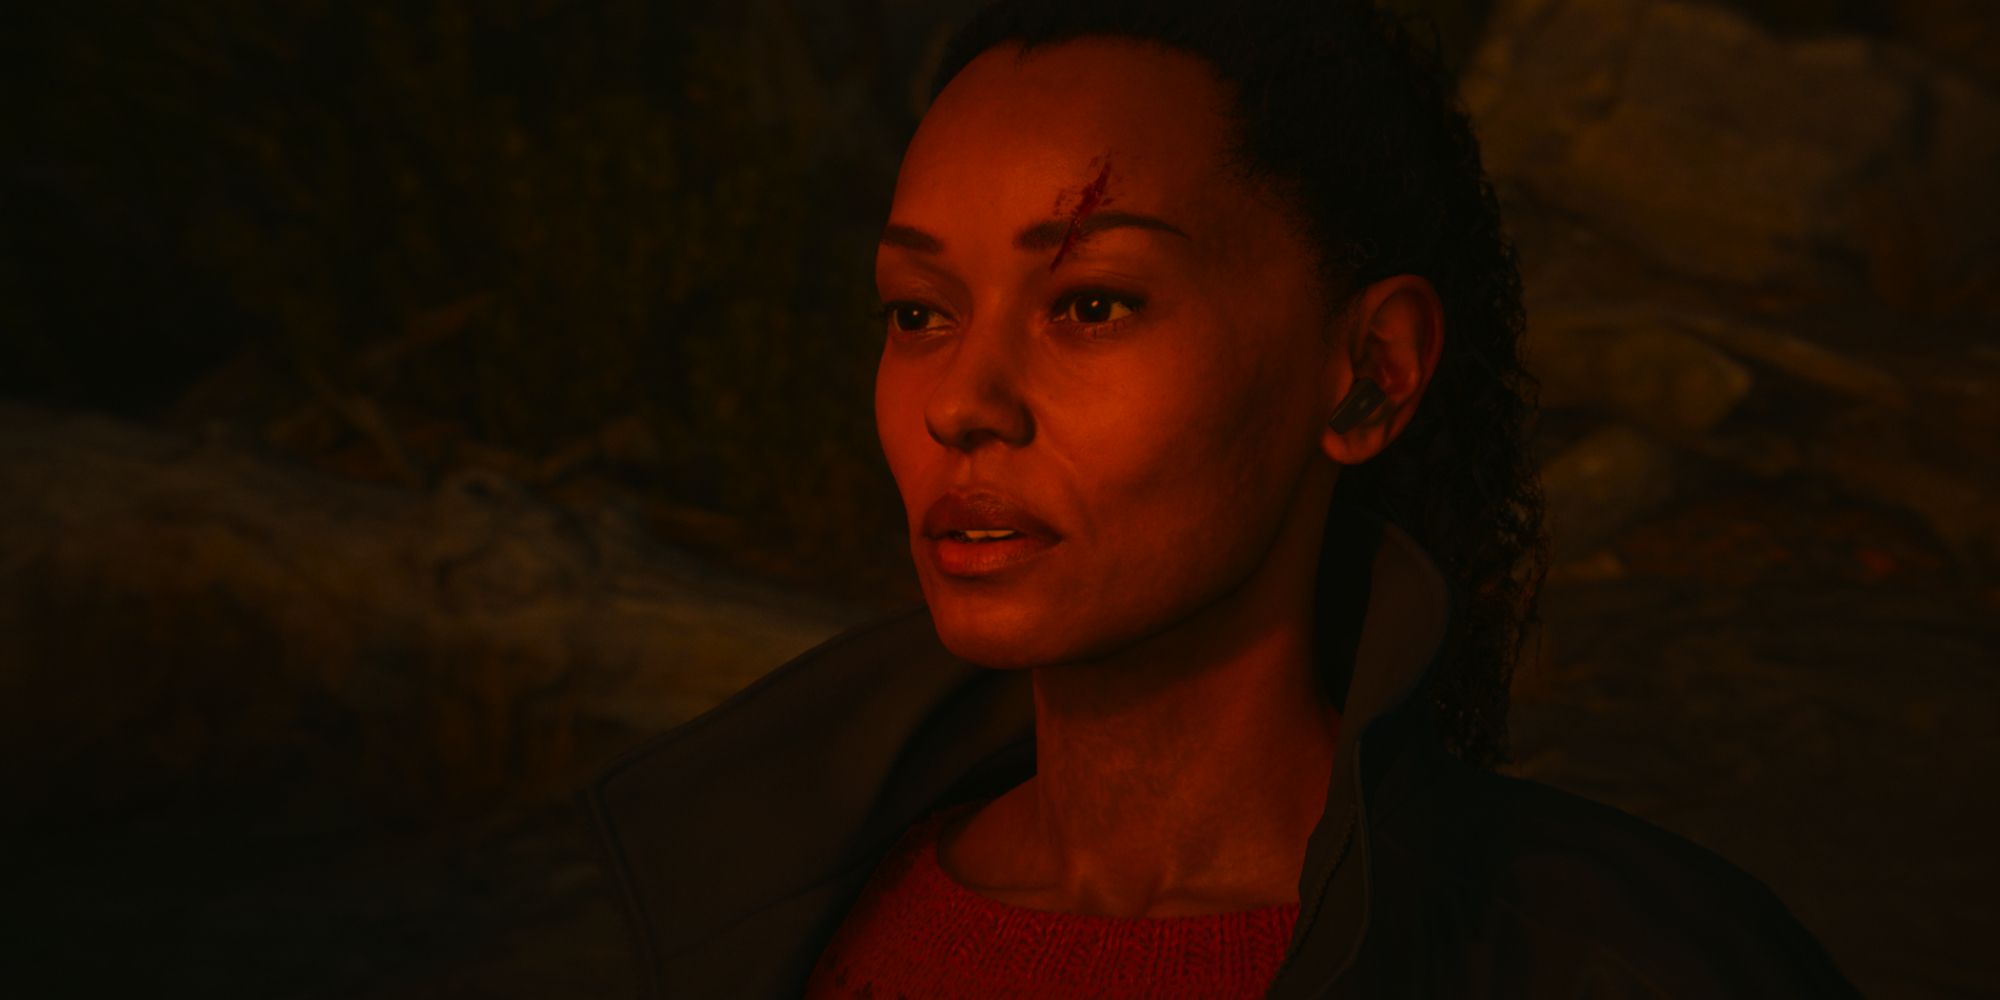 Saga Anderson with a deep cut above her left eye after her fight with Nightingale in Alan Wake 2